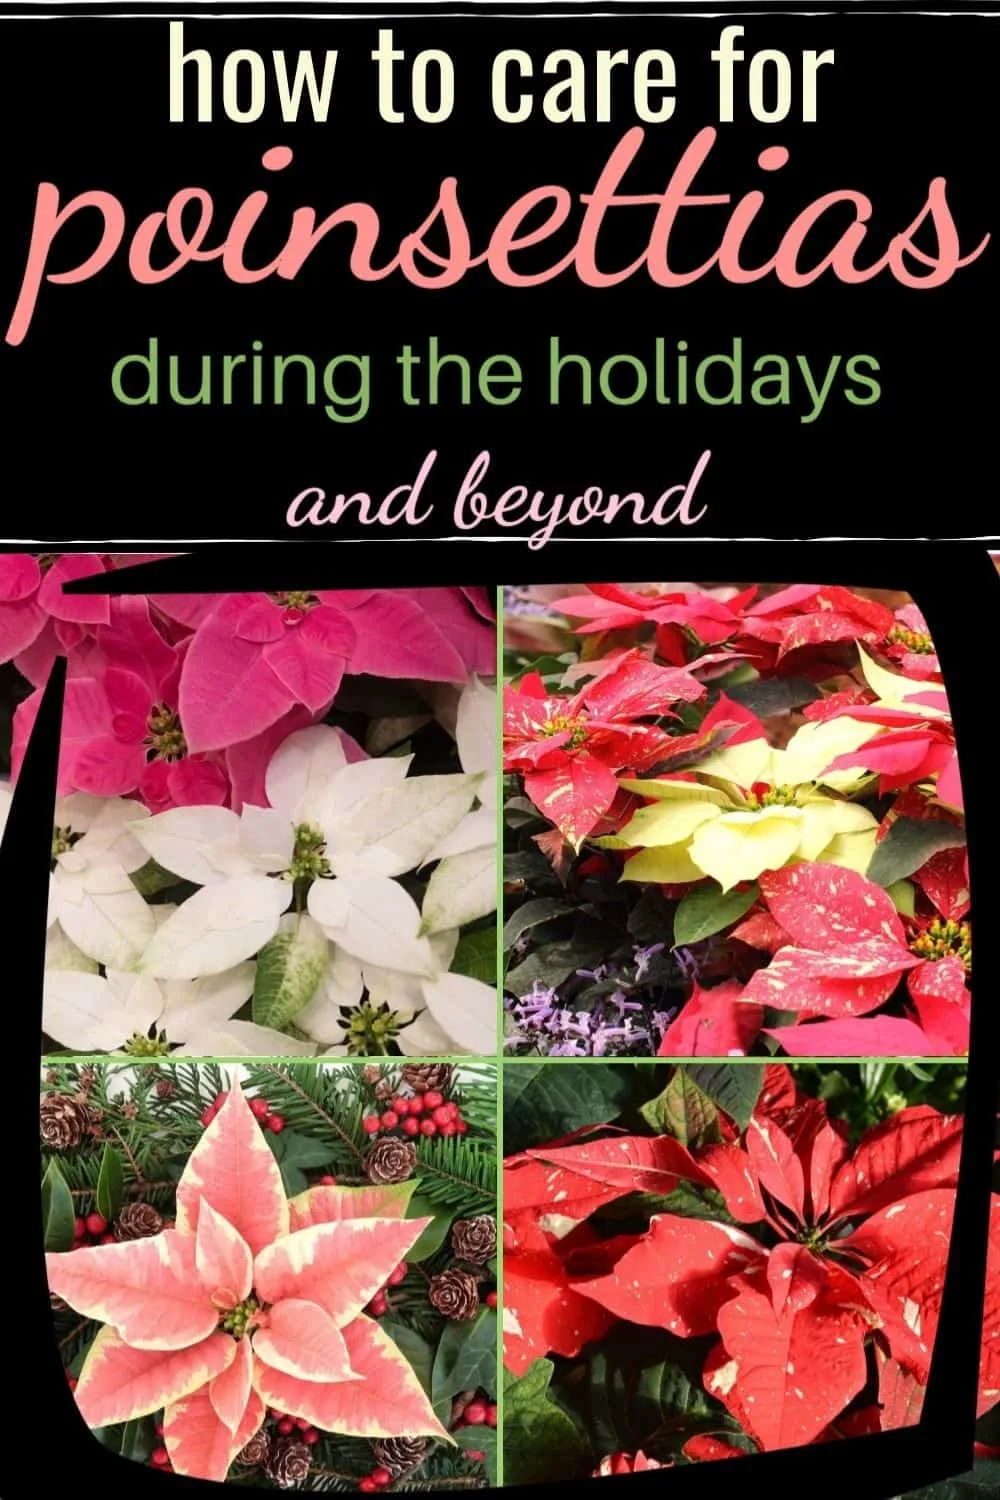 How to care for poinsettias during the holidays and beyond